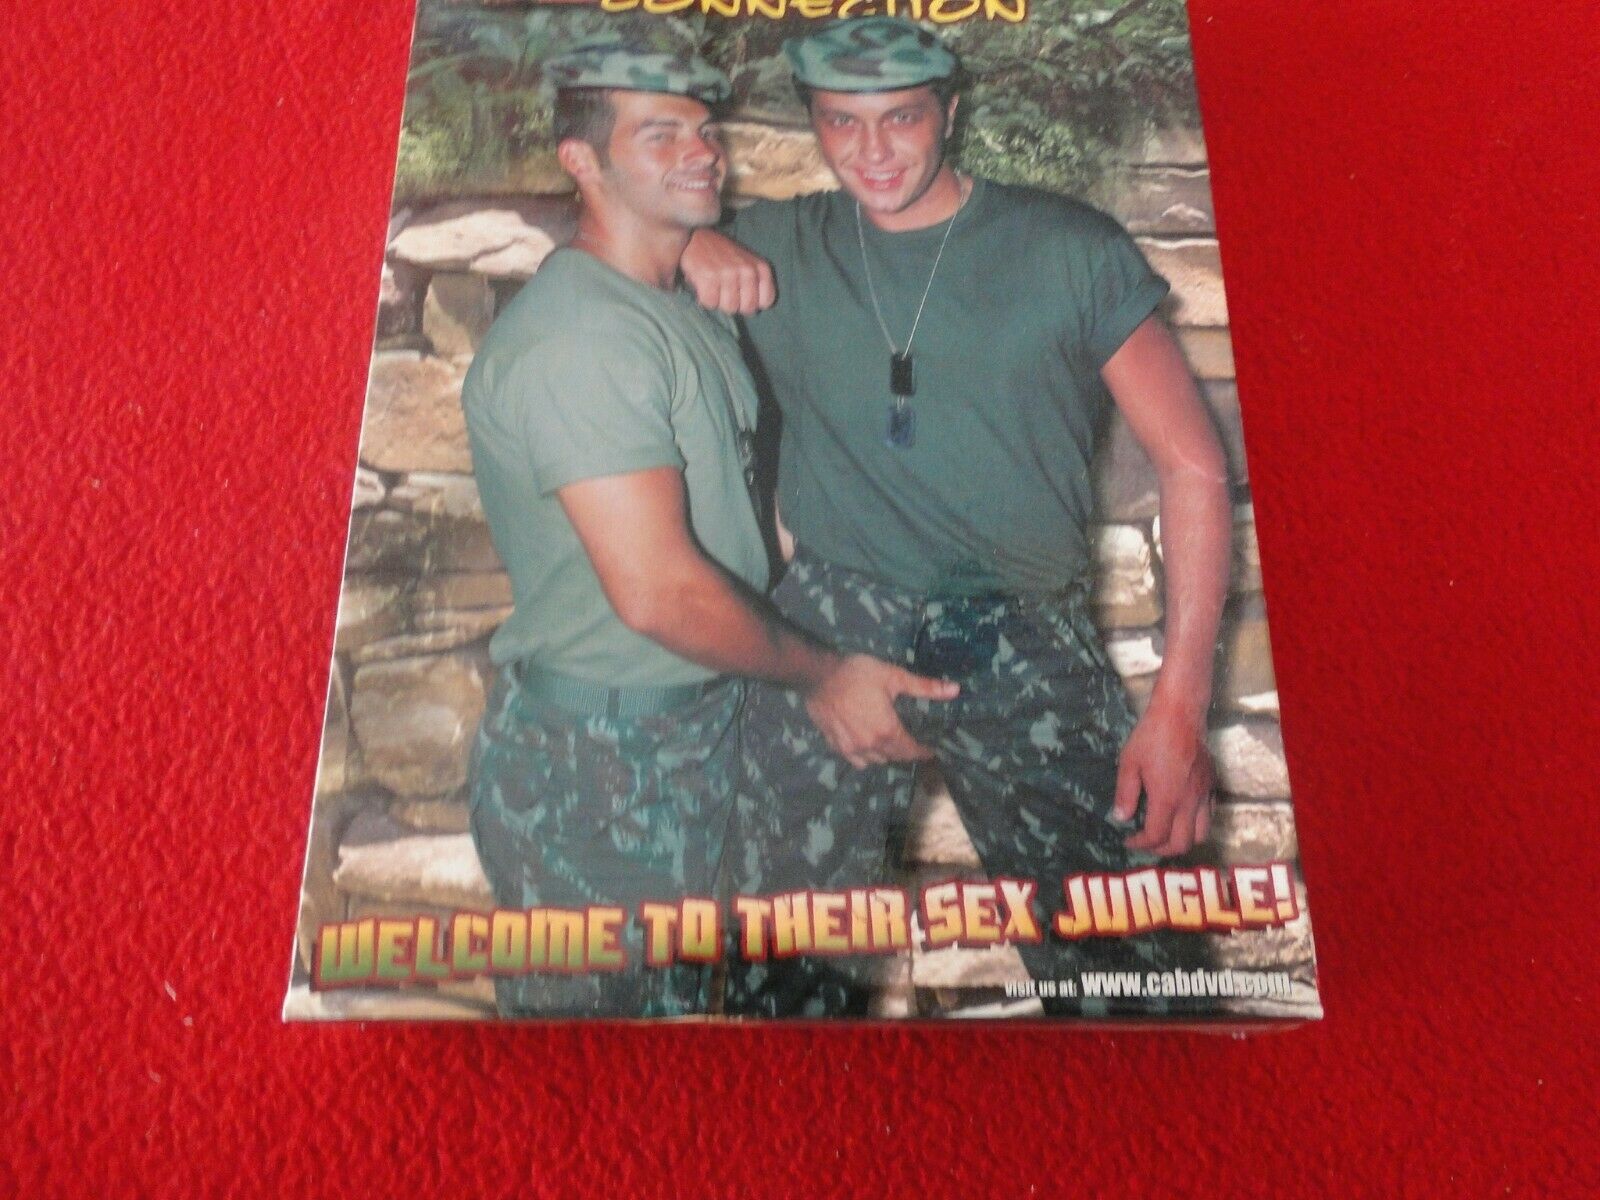 Sexjungle - Vintage Adult XXX Gay VHS Porn Tape Video 18 Year Old + Jungle Connect â€“  Ephemera Galore